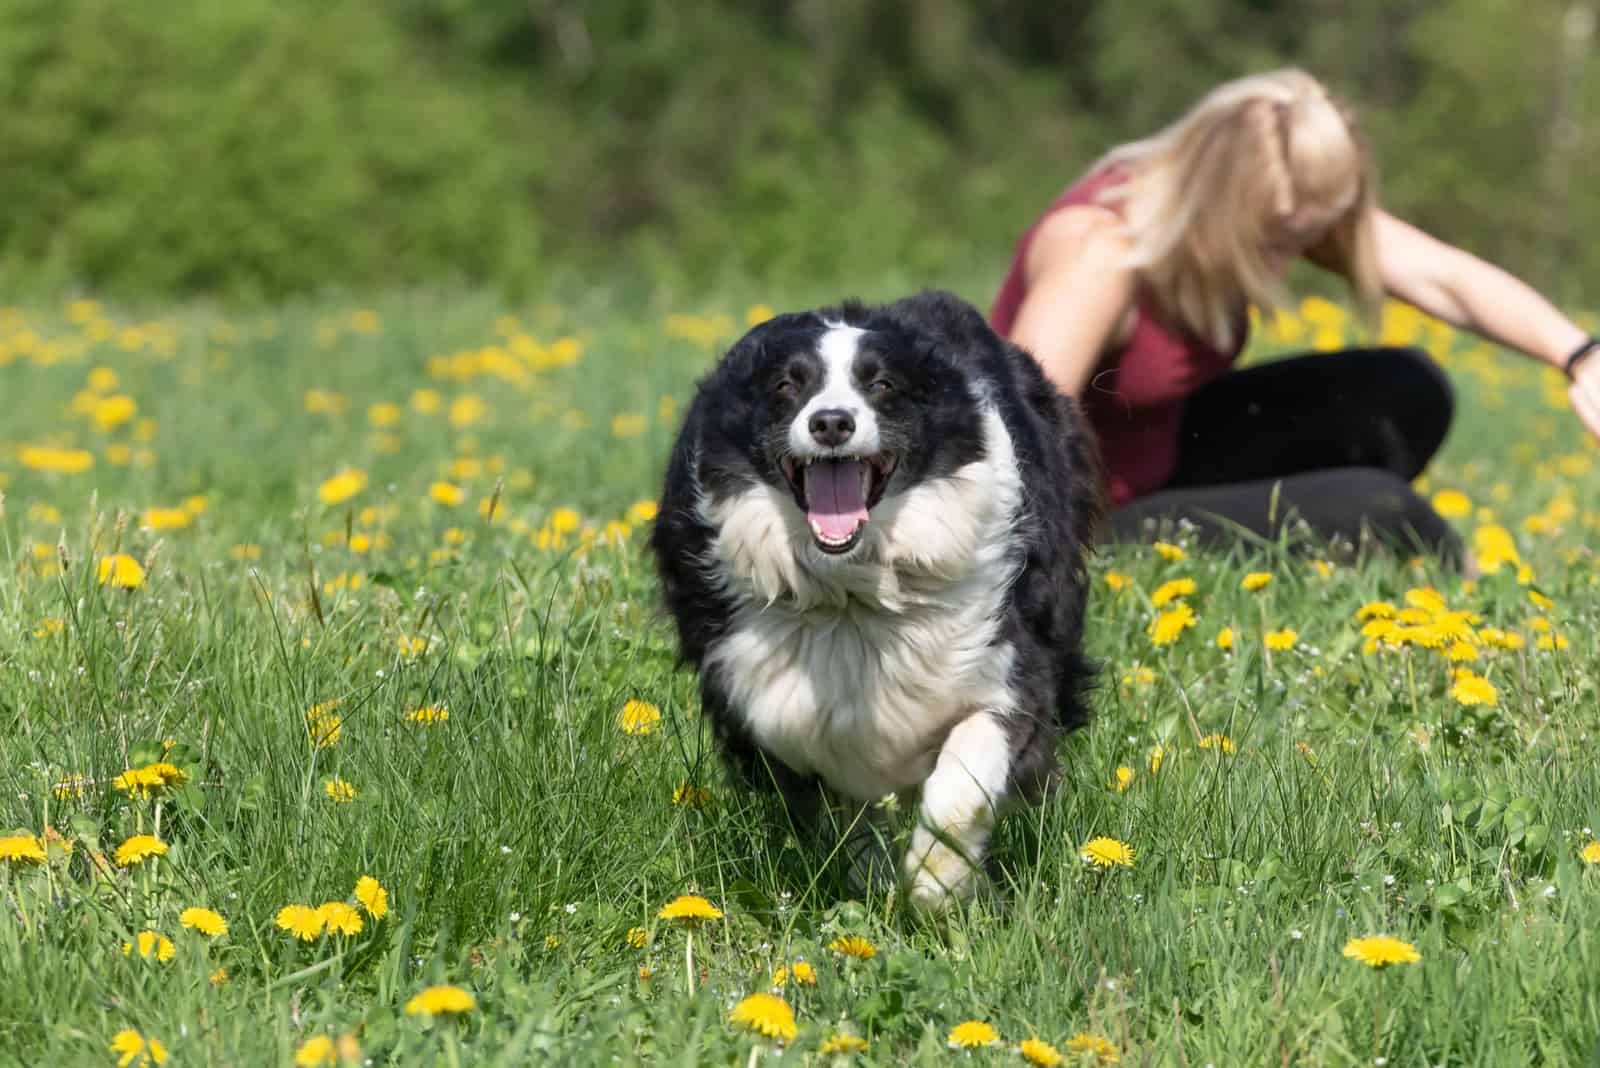 Border Collie runs away from the owner